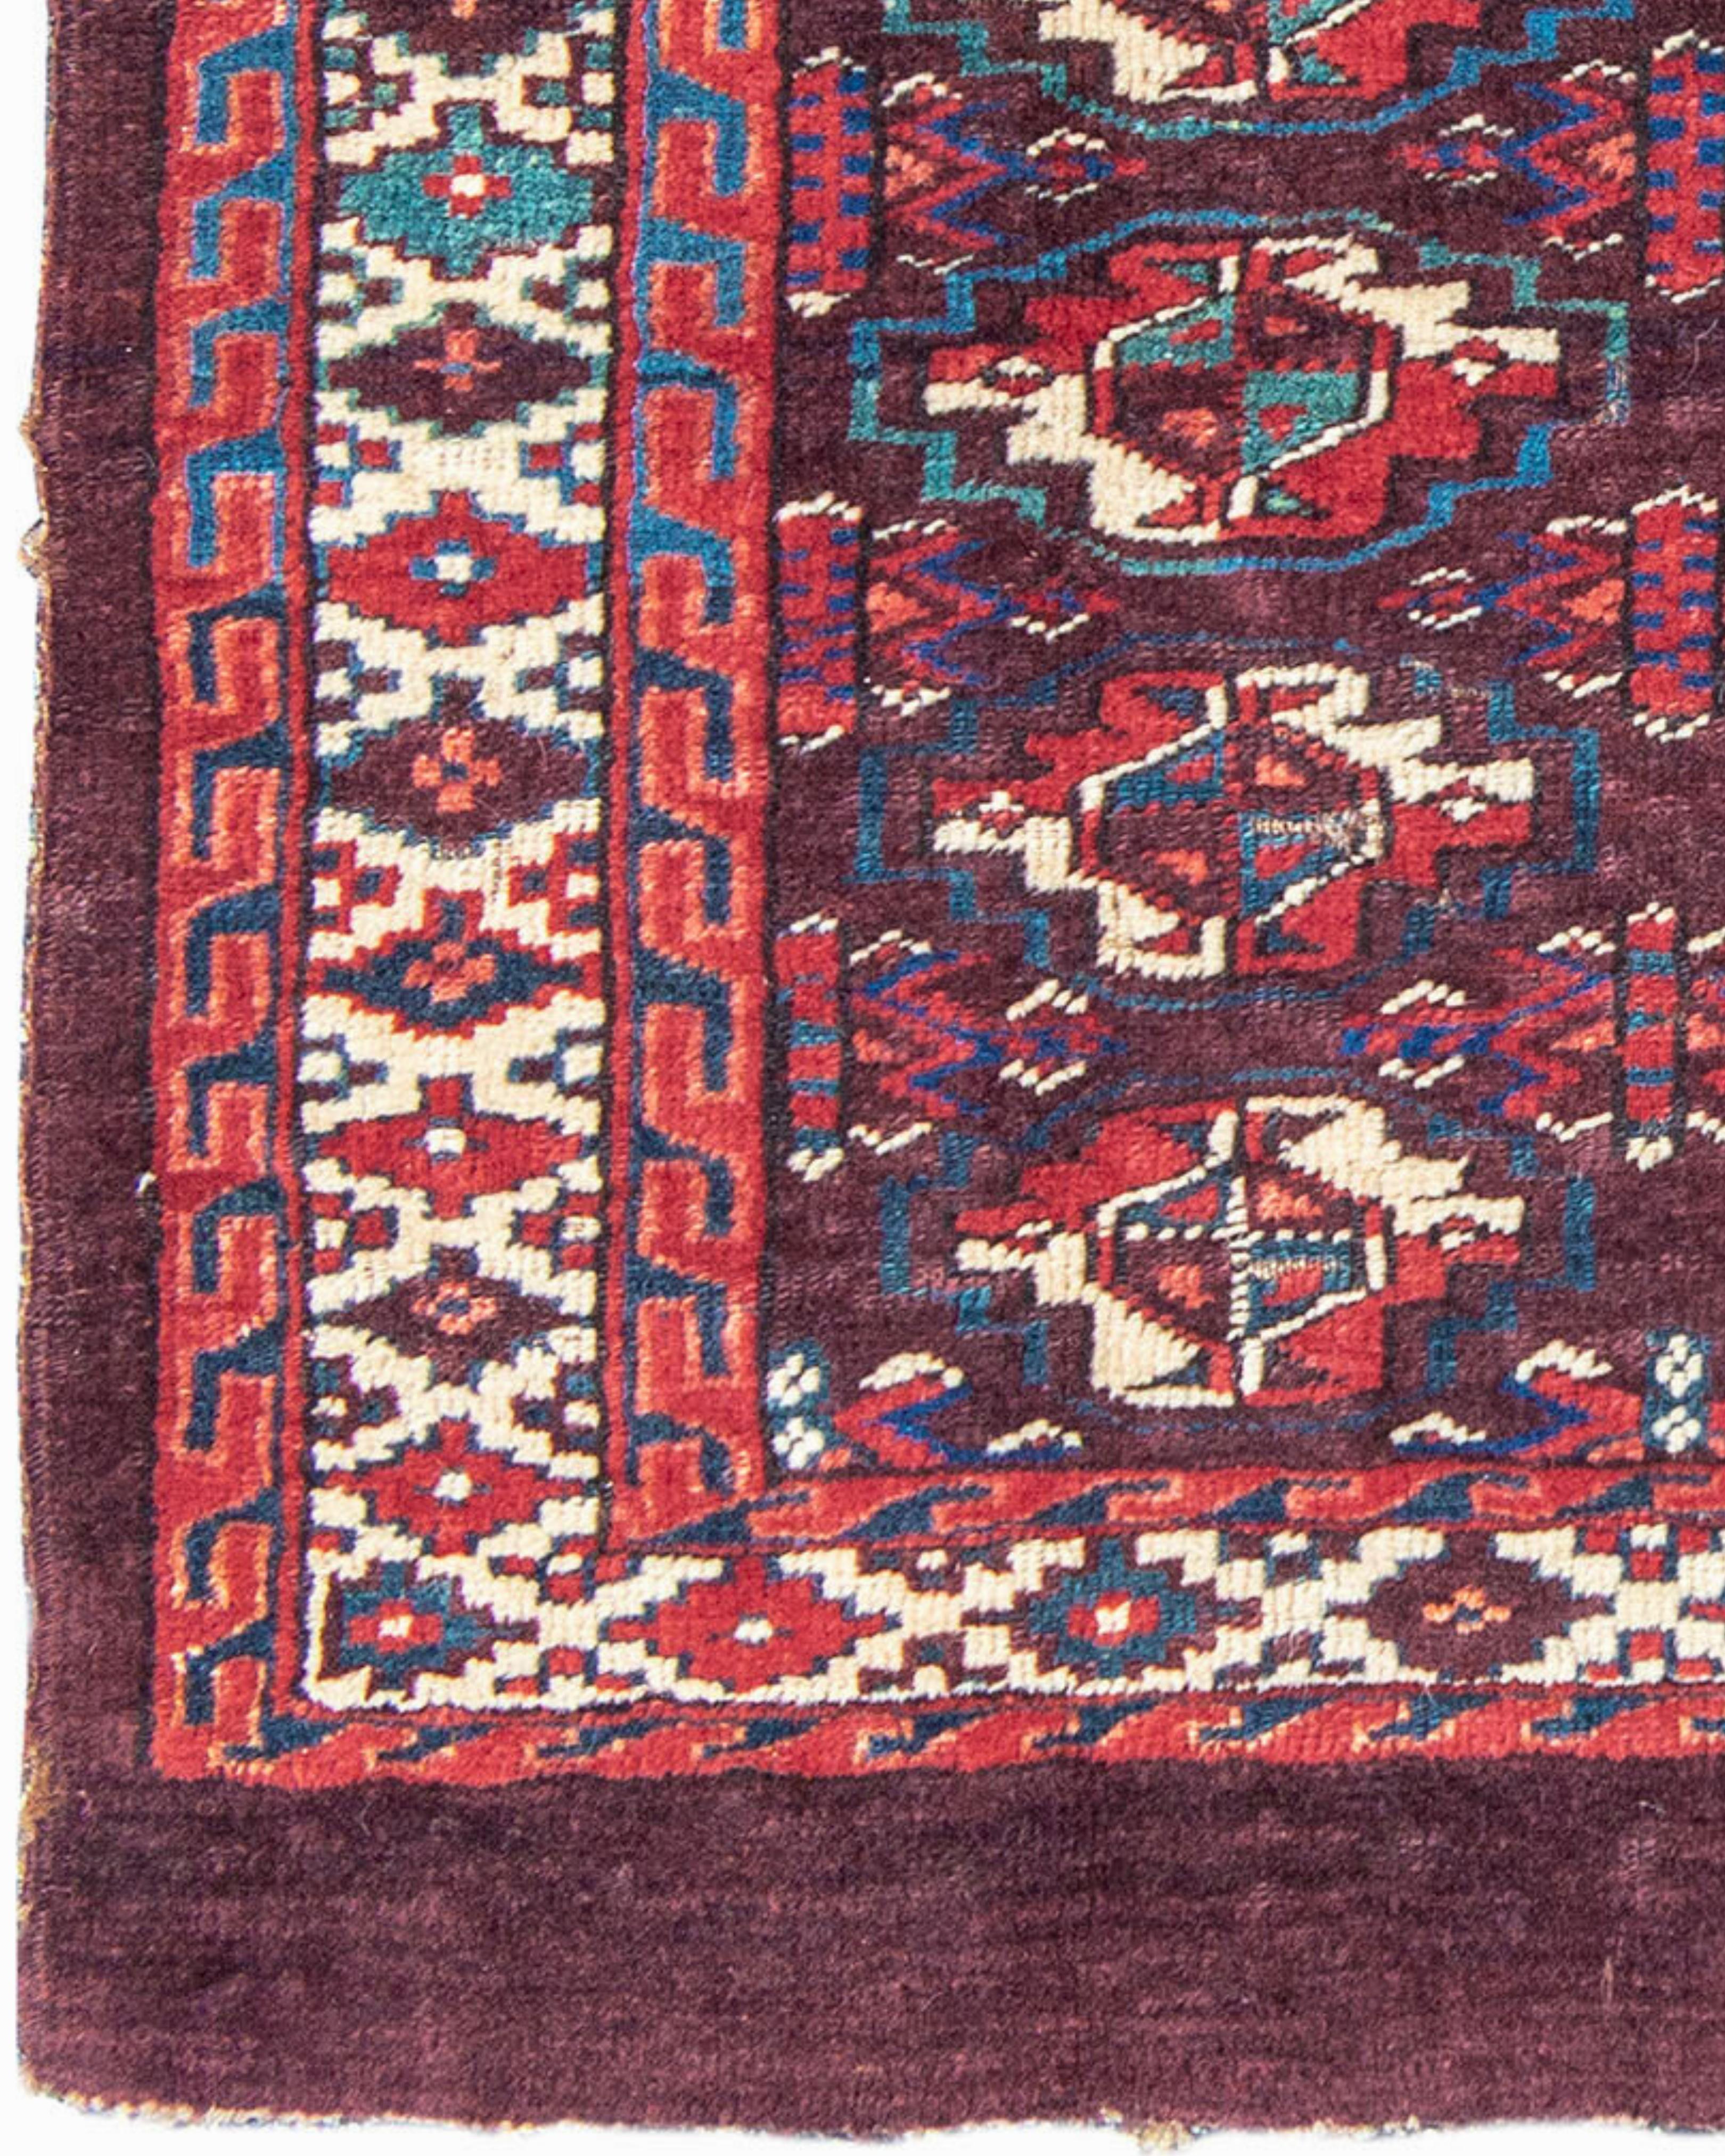 Antique Turkmen Yomut Chuval Rug, 19th Century In Excellent Condition For Sale In San Francisco, CA